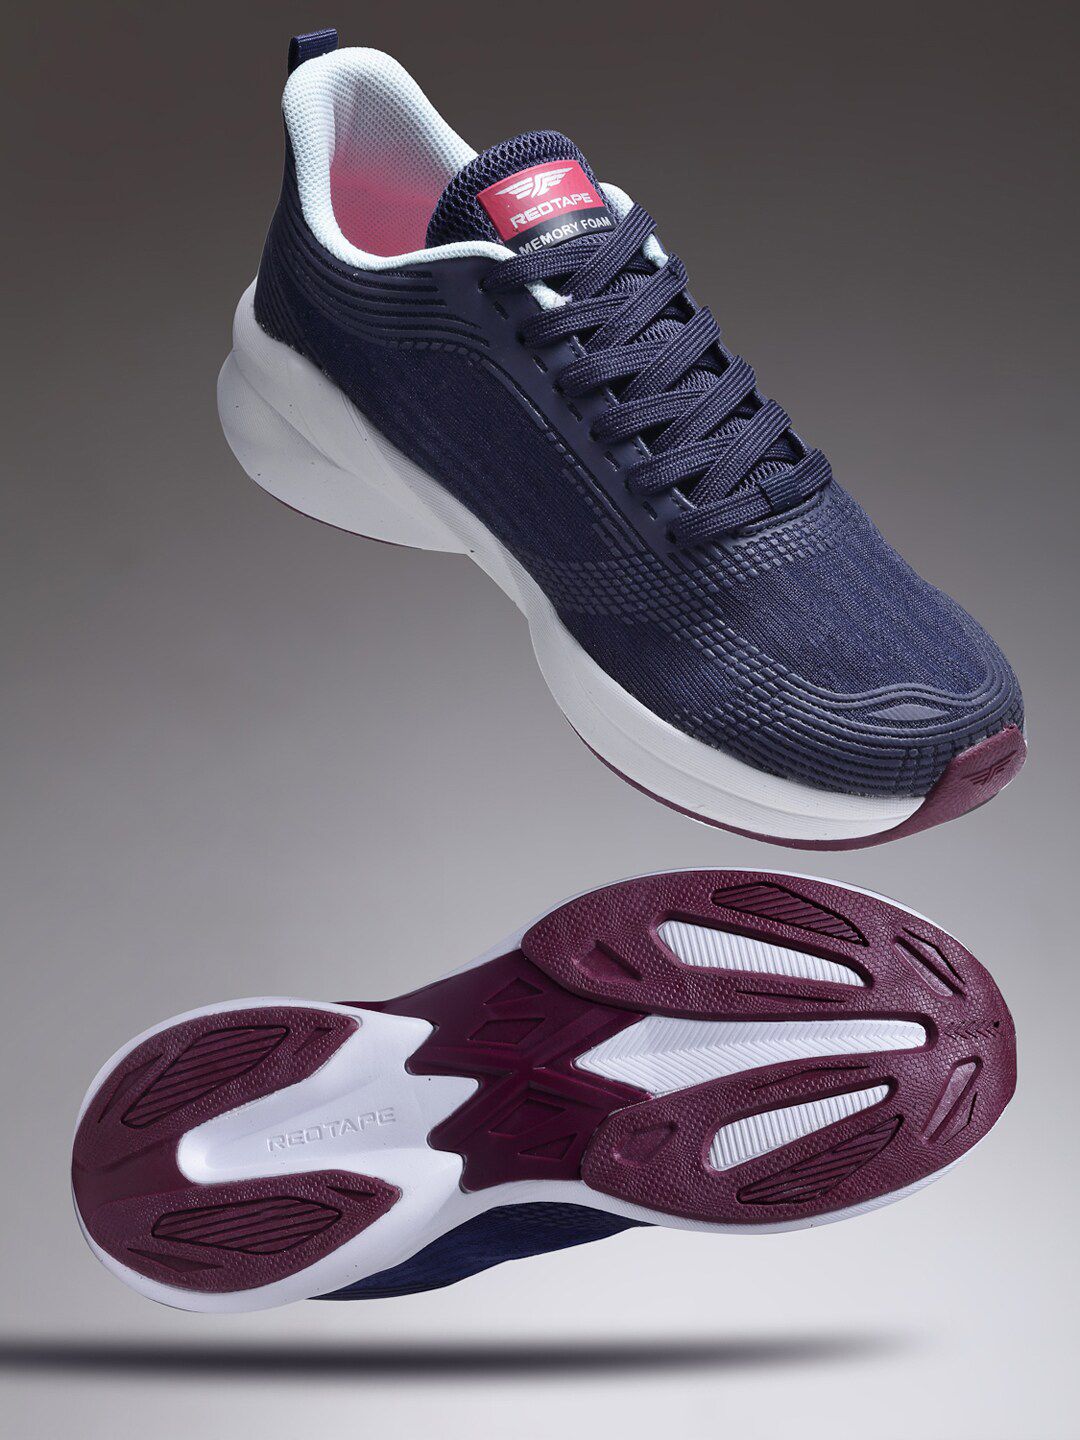 Red Tape Women Navy Blue Mesh Walking Shoes Price in India